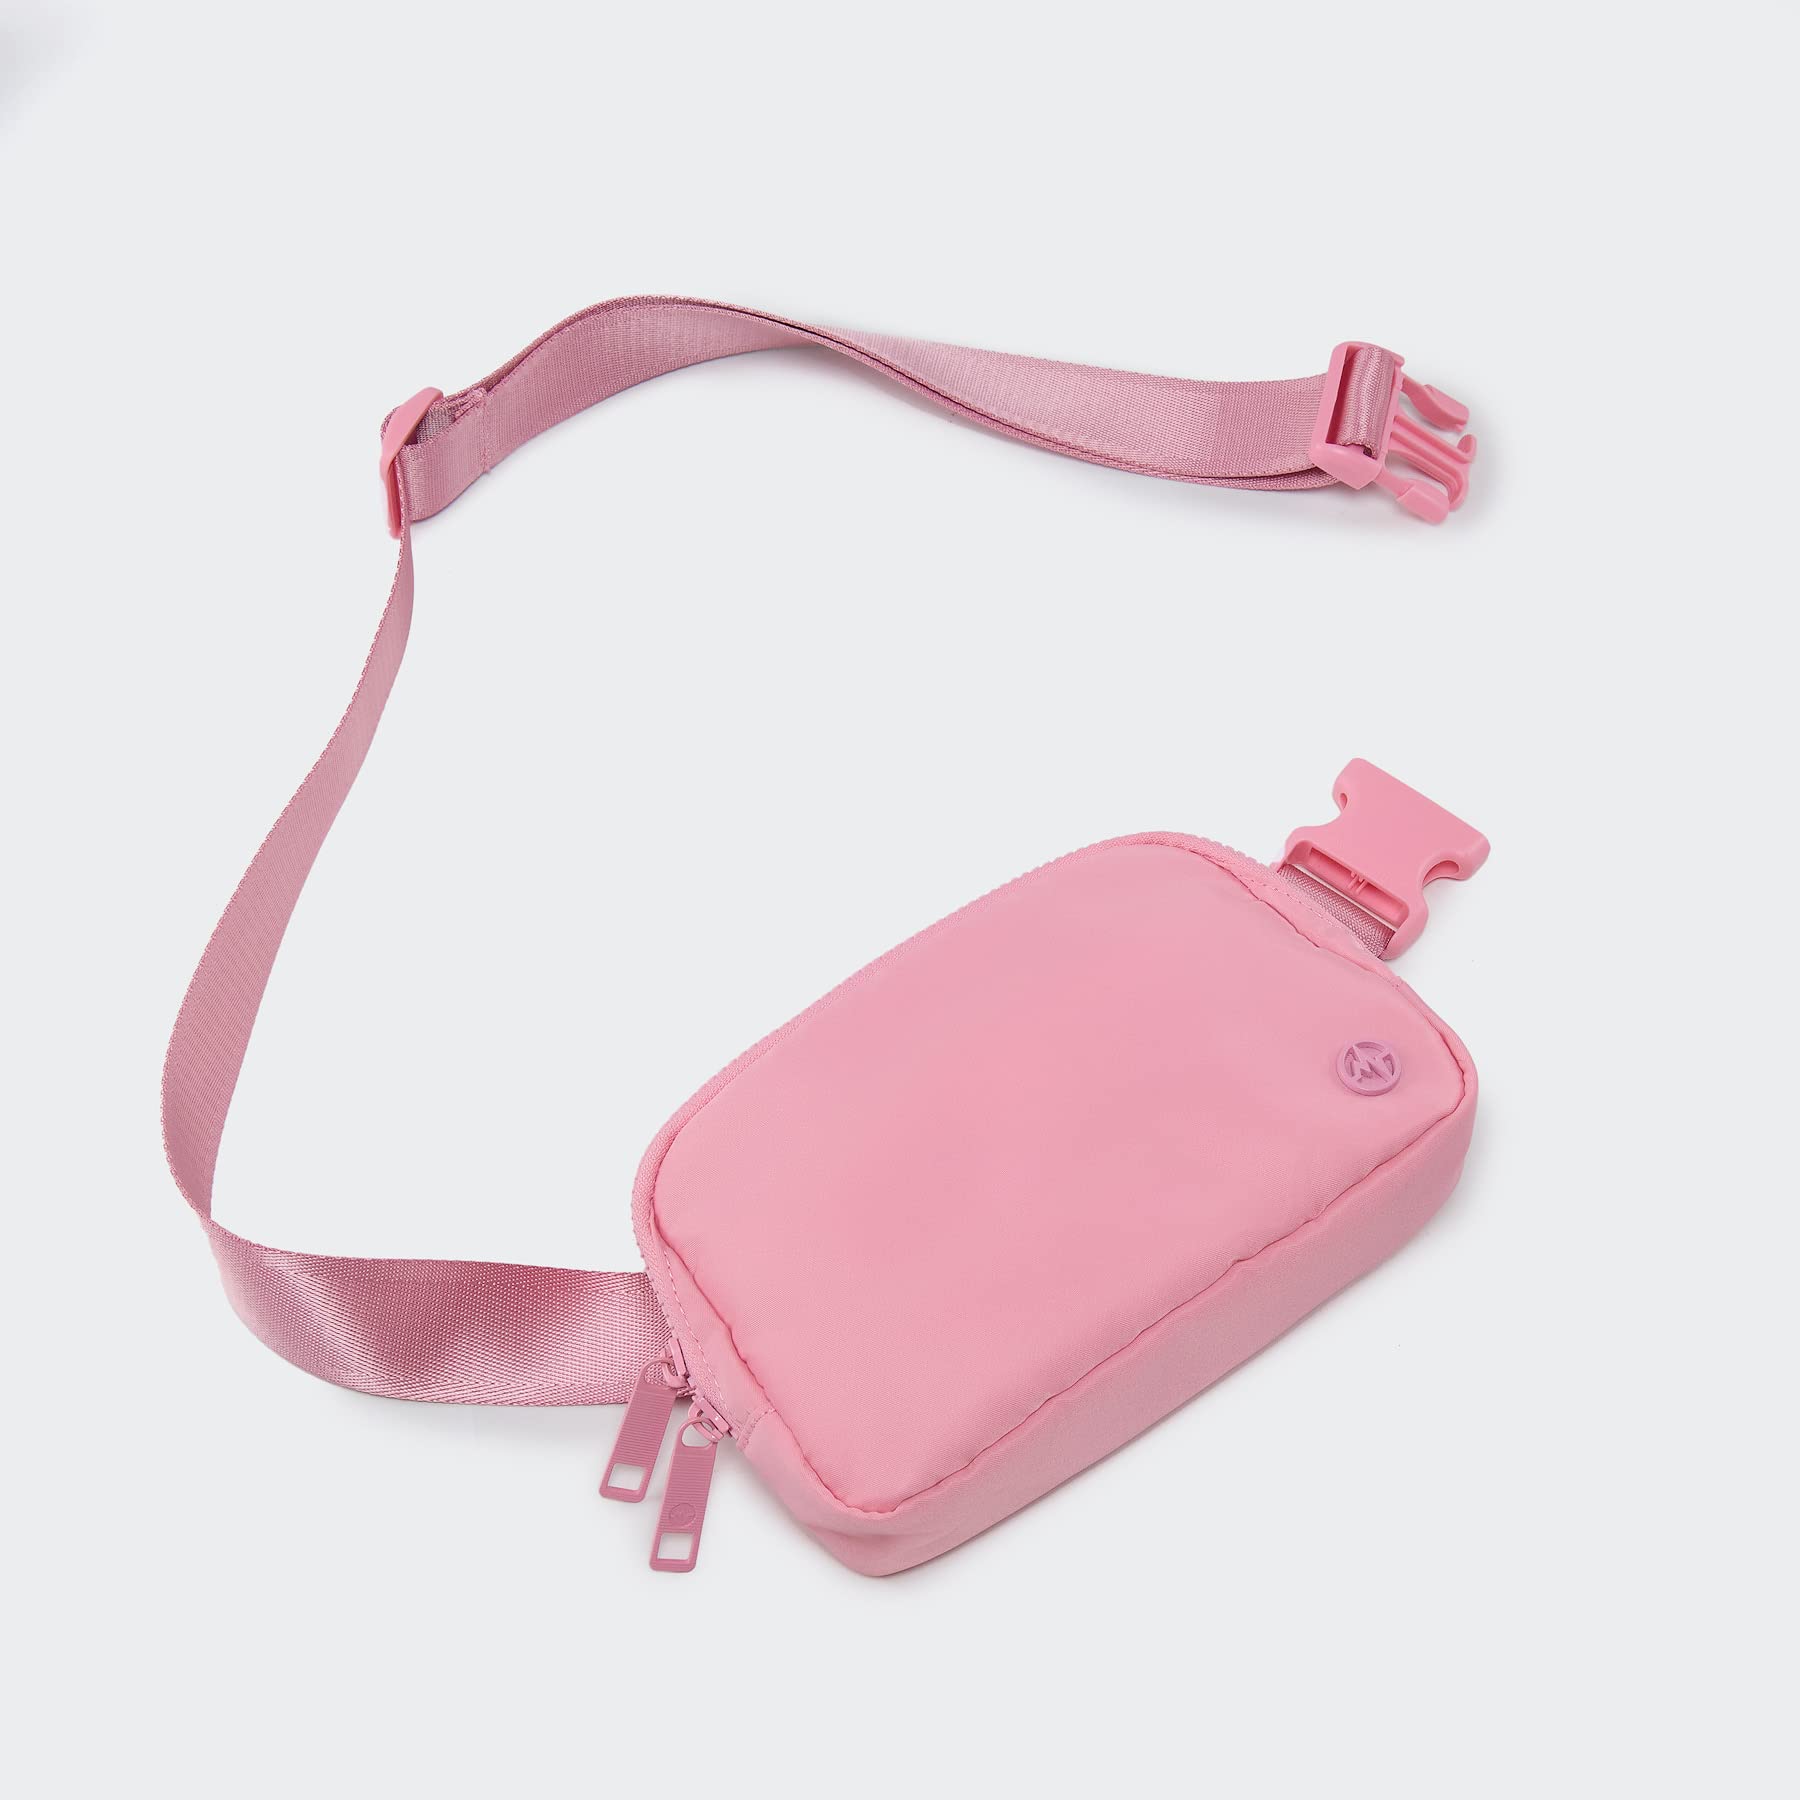 Pander Cross Body Fanny Pack for Women, Fashion Waist Packs, Crossbody Bags, Belt Bag with Adjustable Strap (Crystal Rose, US).